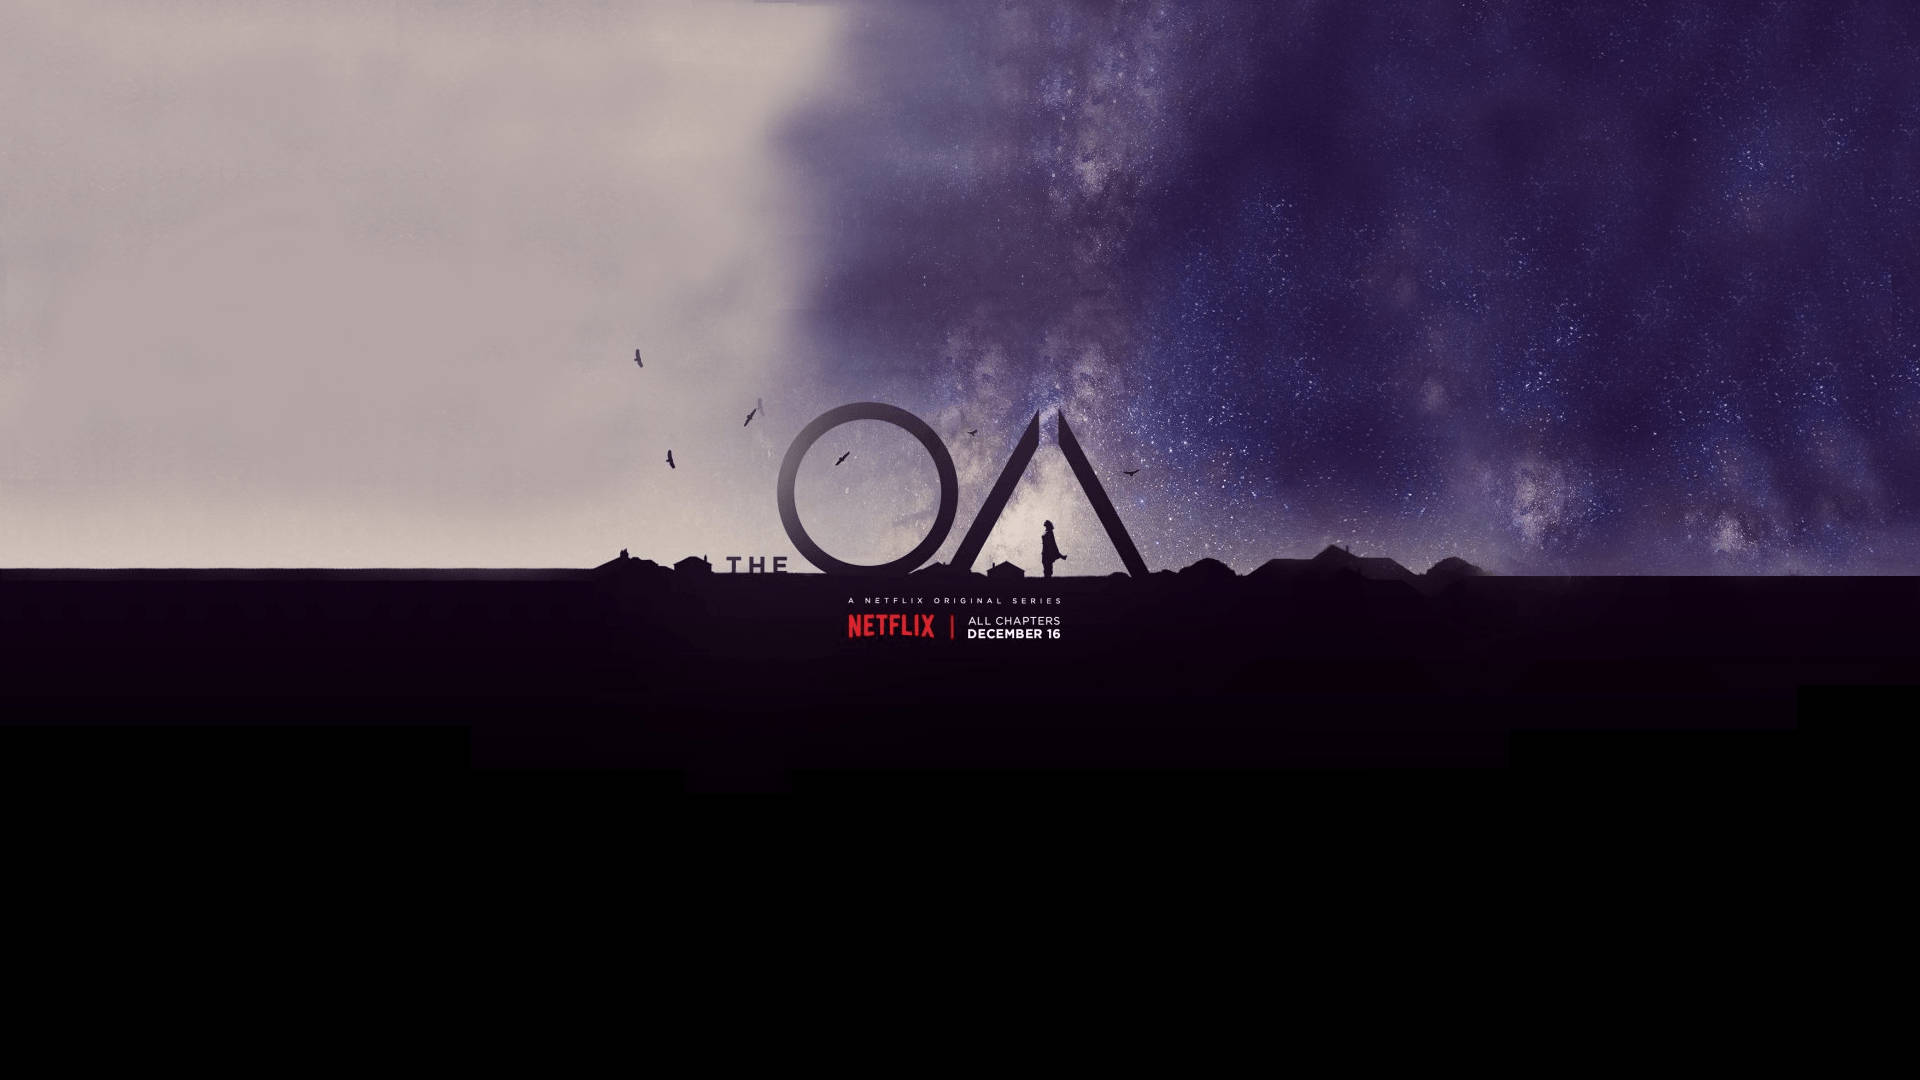 The Oa Netflix Series Poster Background